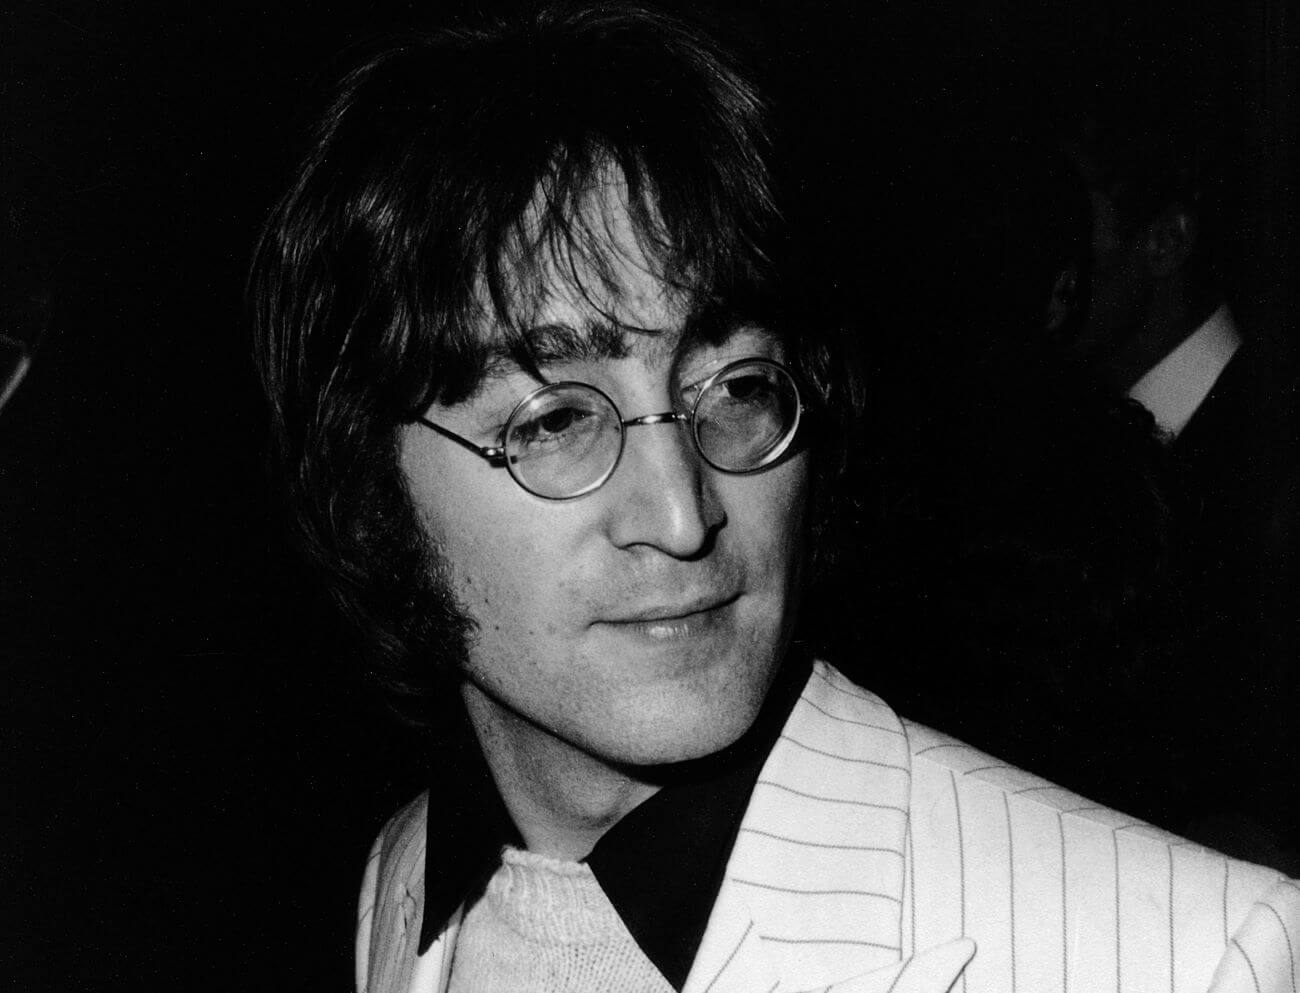 John Lennon Revealed He Was Shot at as a Child